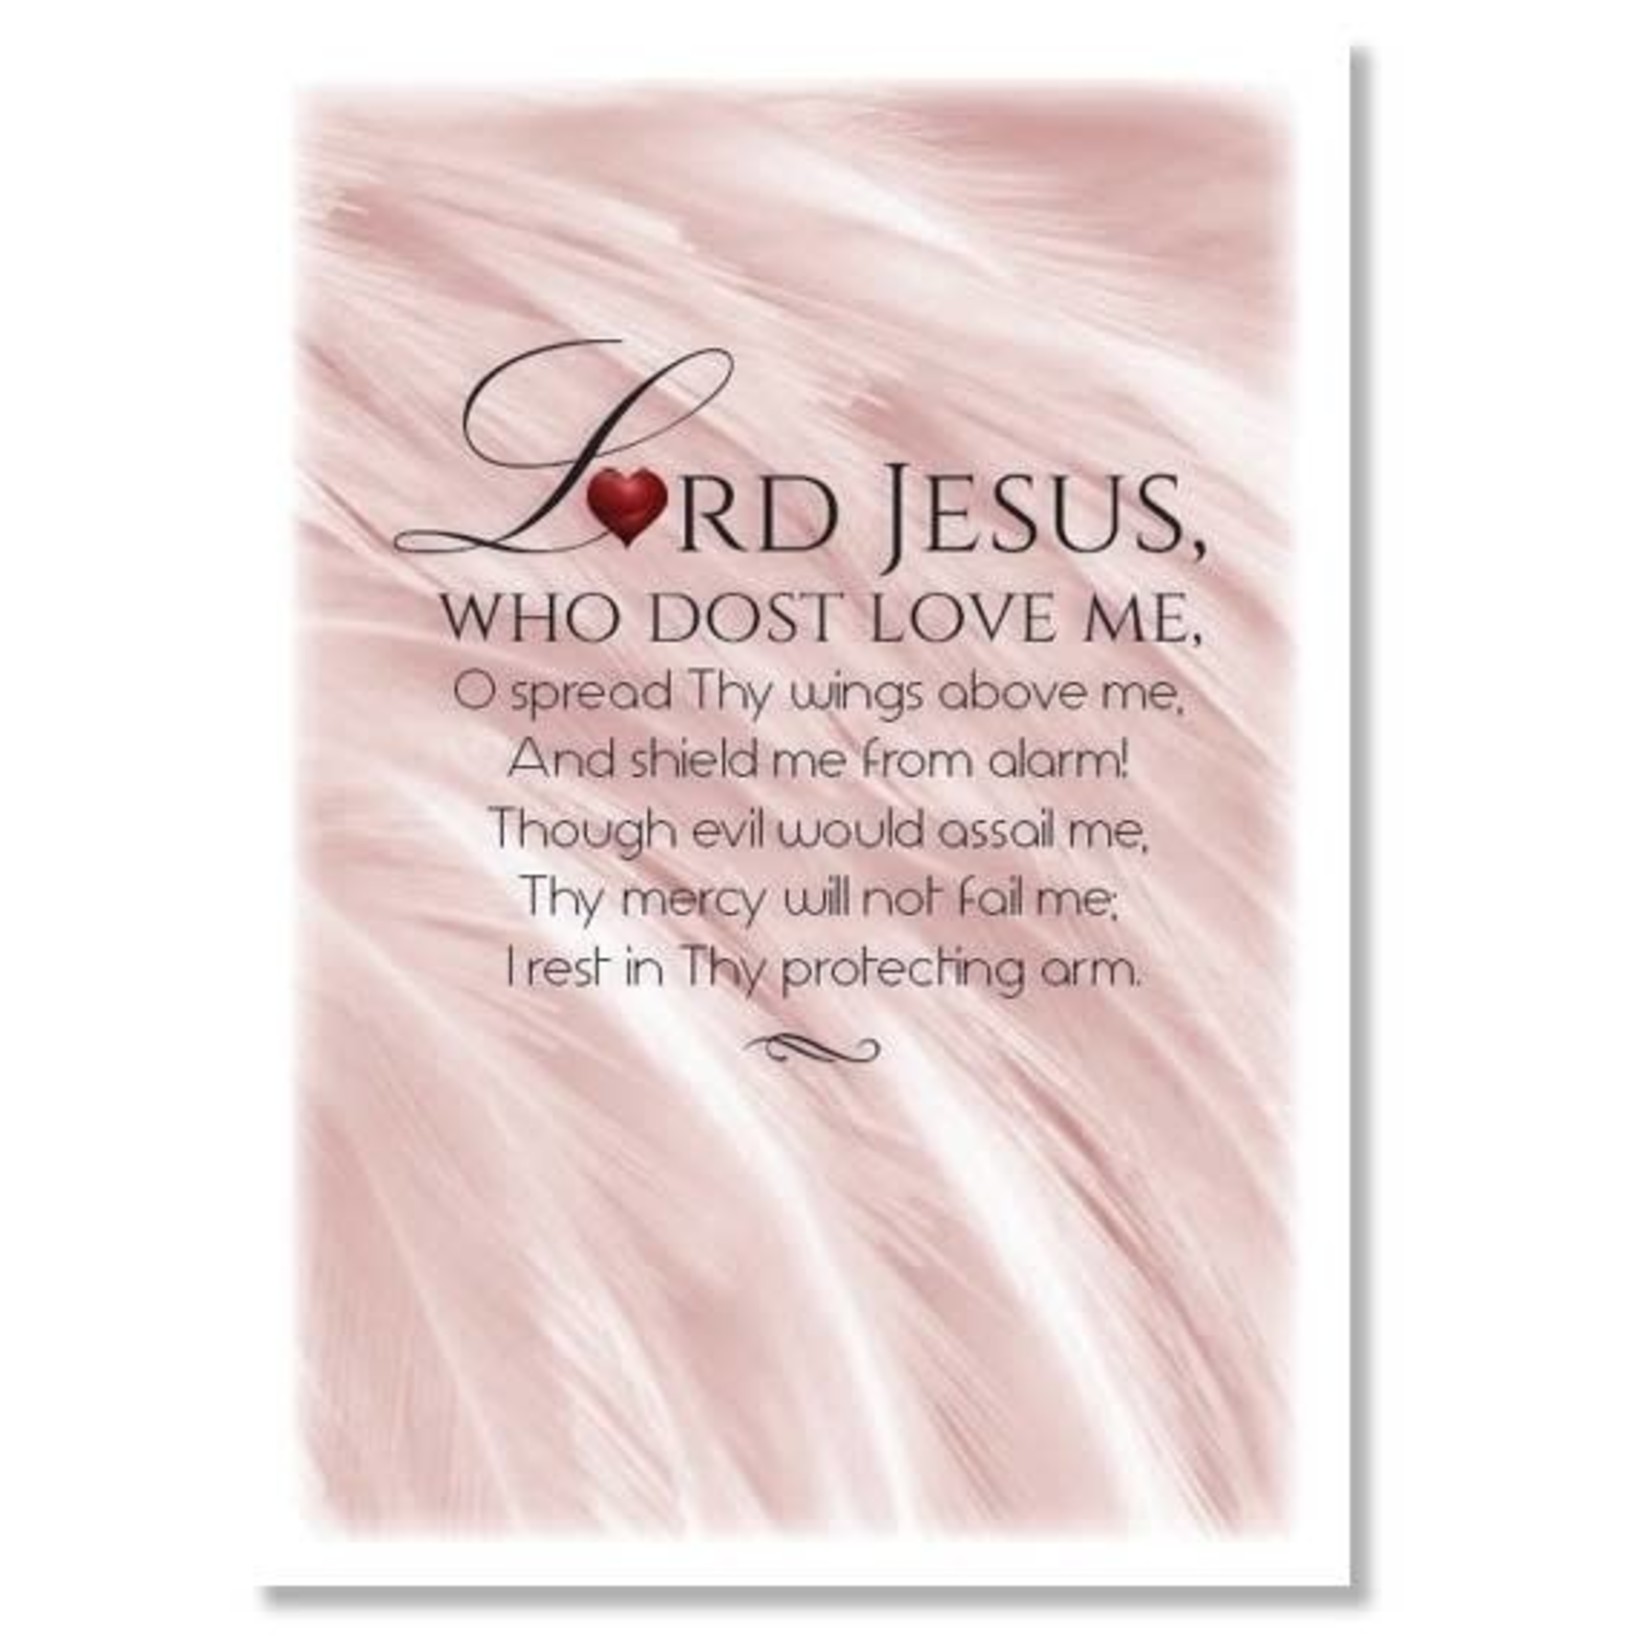 Hymns In My Heart - 5x7" Greeting Card - Hospice - Lord Jesus Who Dost Love Me